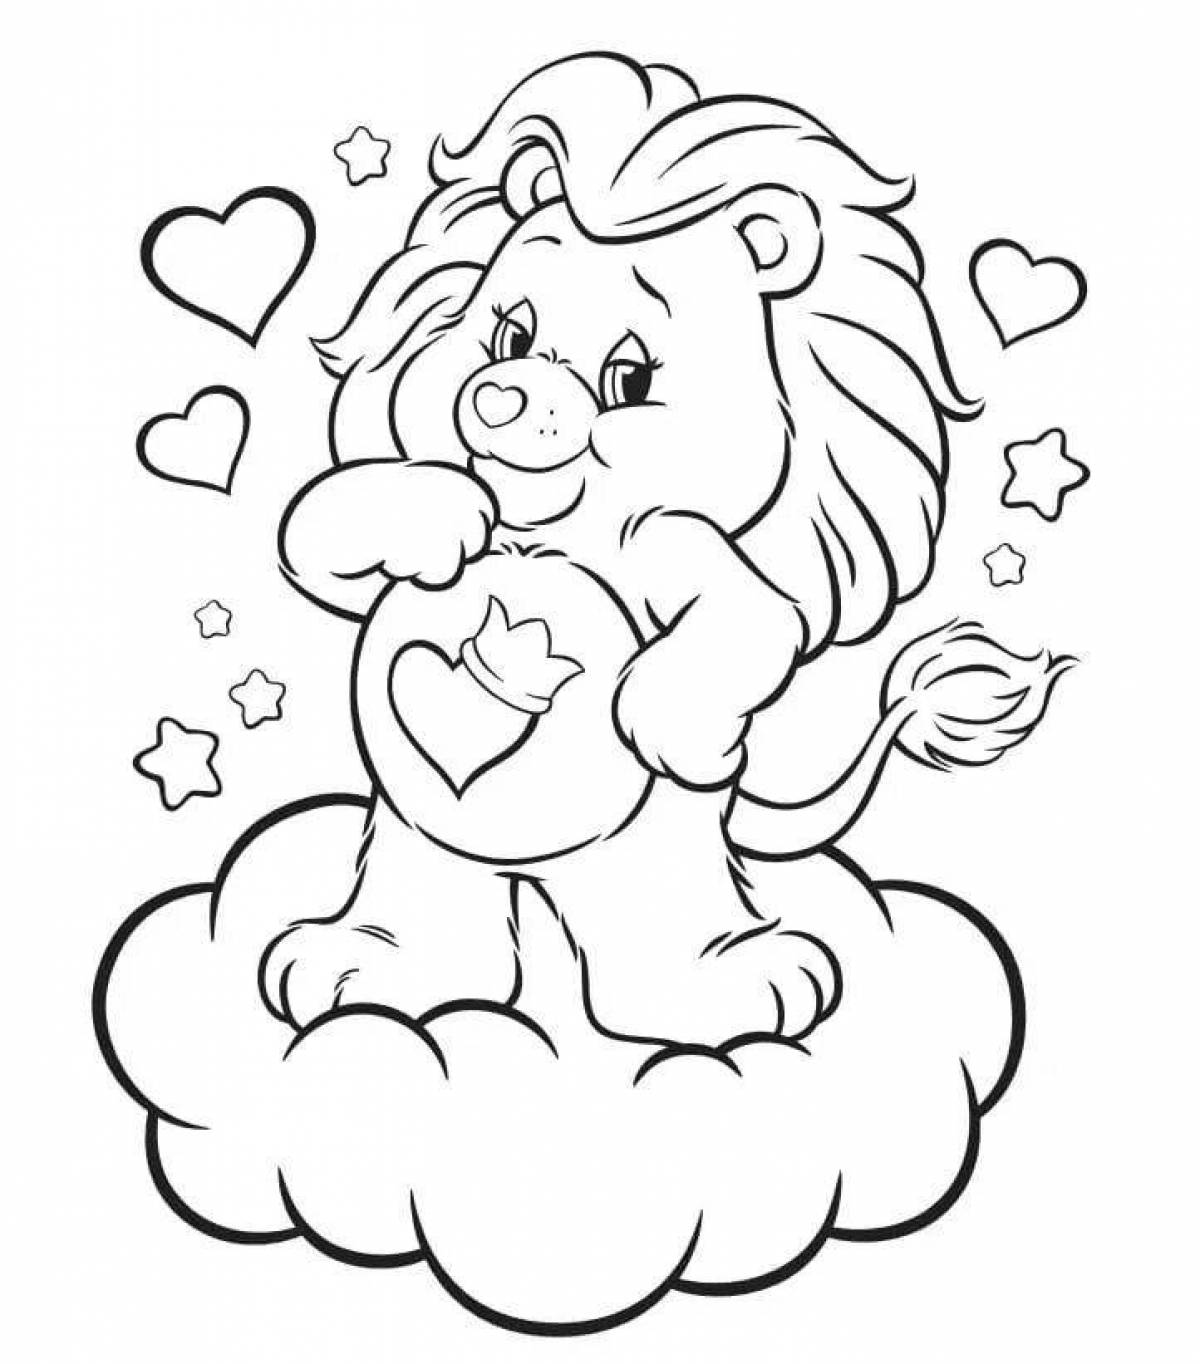 Consolation care bears coloring page